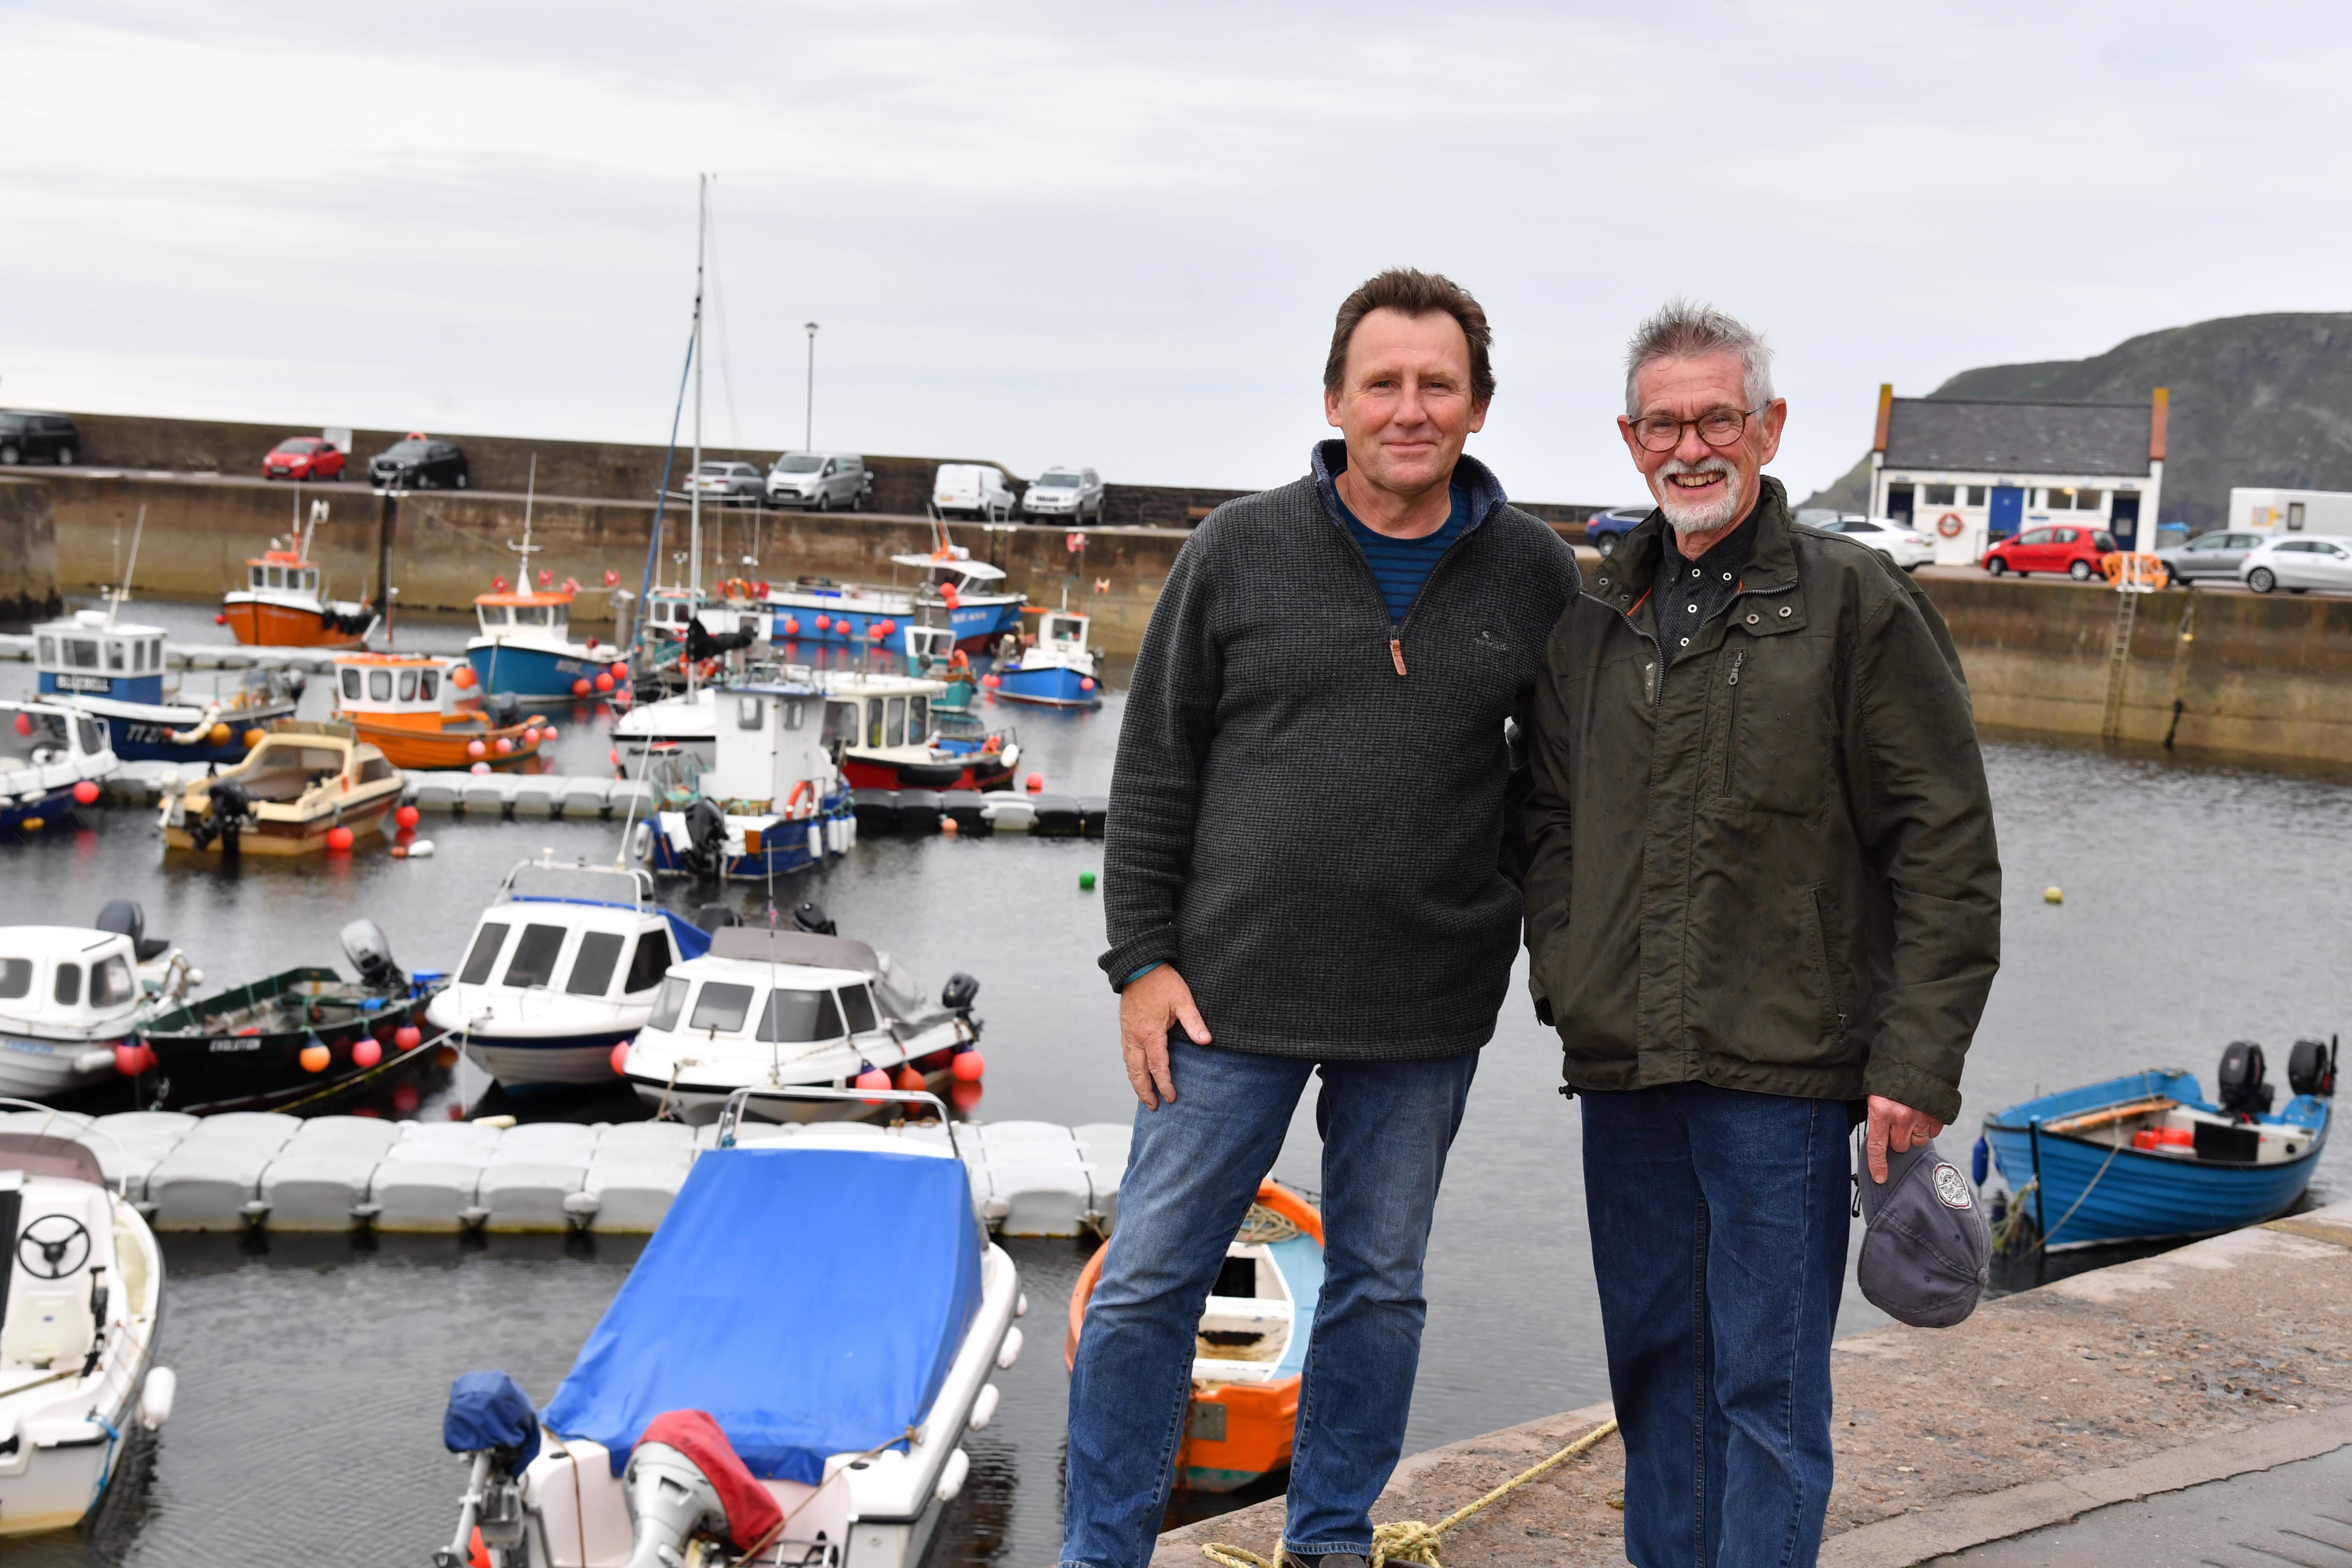 BOB HOLLIMAN (L) FROM THE GARDENSTOWN COMMUNITY HUB AND ANDY STURDY FROM THE GARDENSTOWN VILLAGE ACTION COMMITTEE WILL BE INVOLVED IN THIS YEARS HARBOUR GALA DAY.